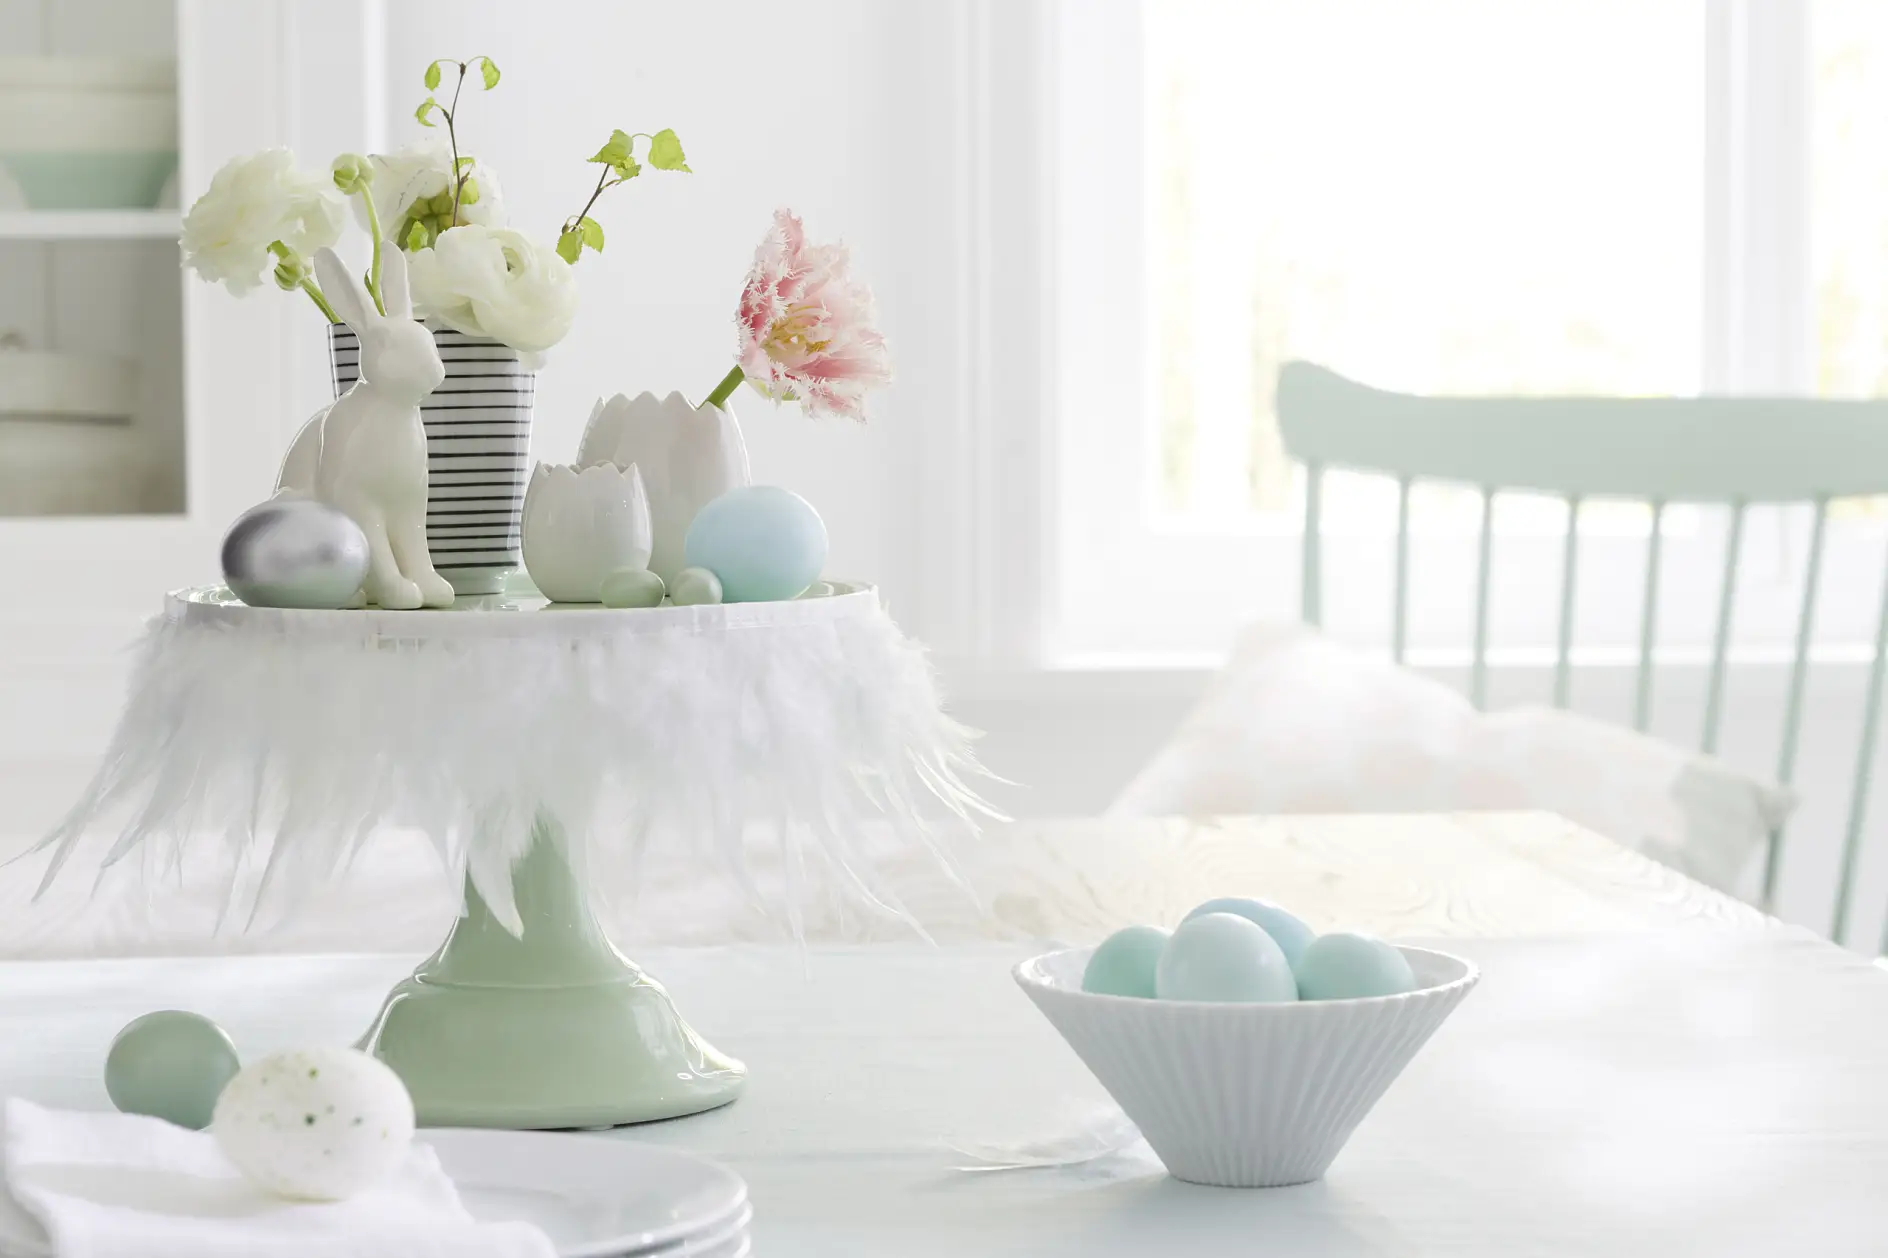 White feathers transform a cake stand into a Easter stage for bunnies, flowers and eggs. The secret weapon for this quick decoration idea: tesa® double-sided adhesive tape.